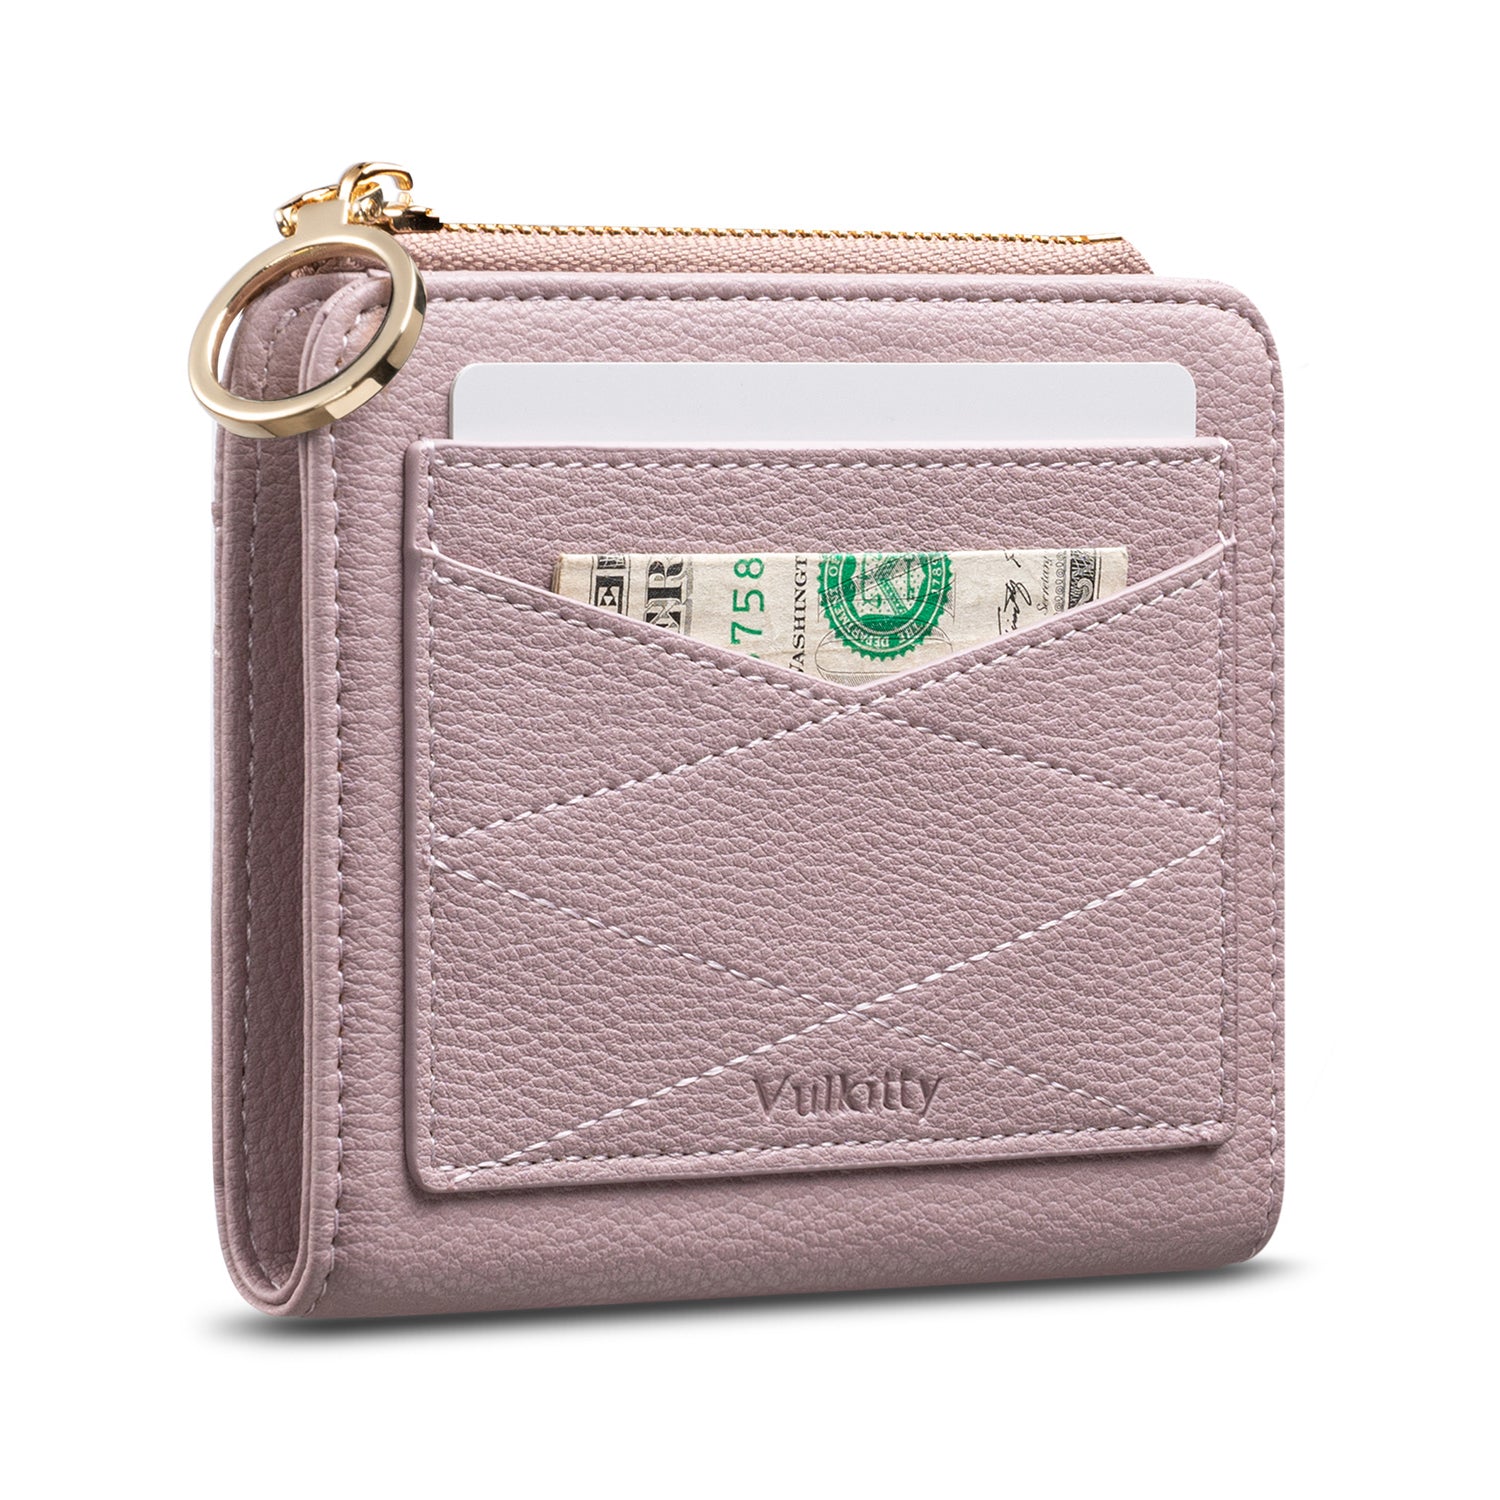 PU Leather Small Bifold Girls Wallets Compact Female Cute -  Denmark